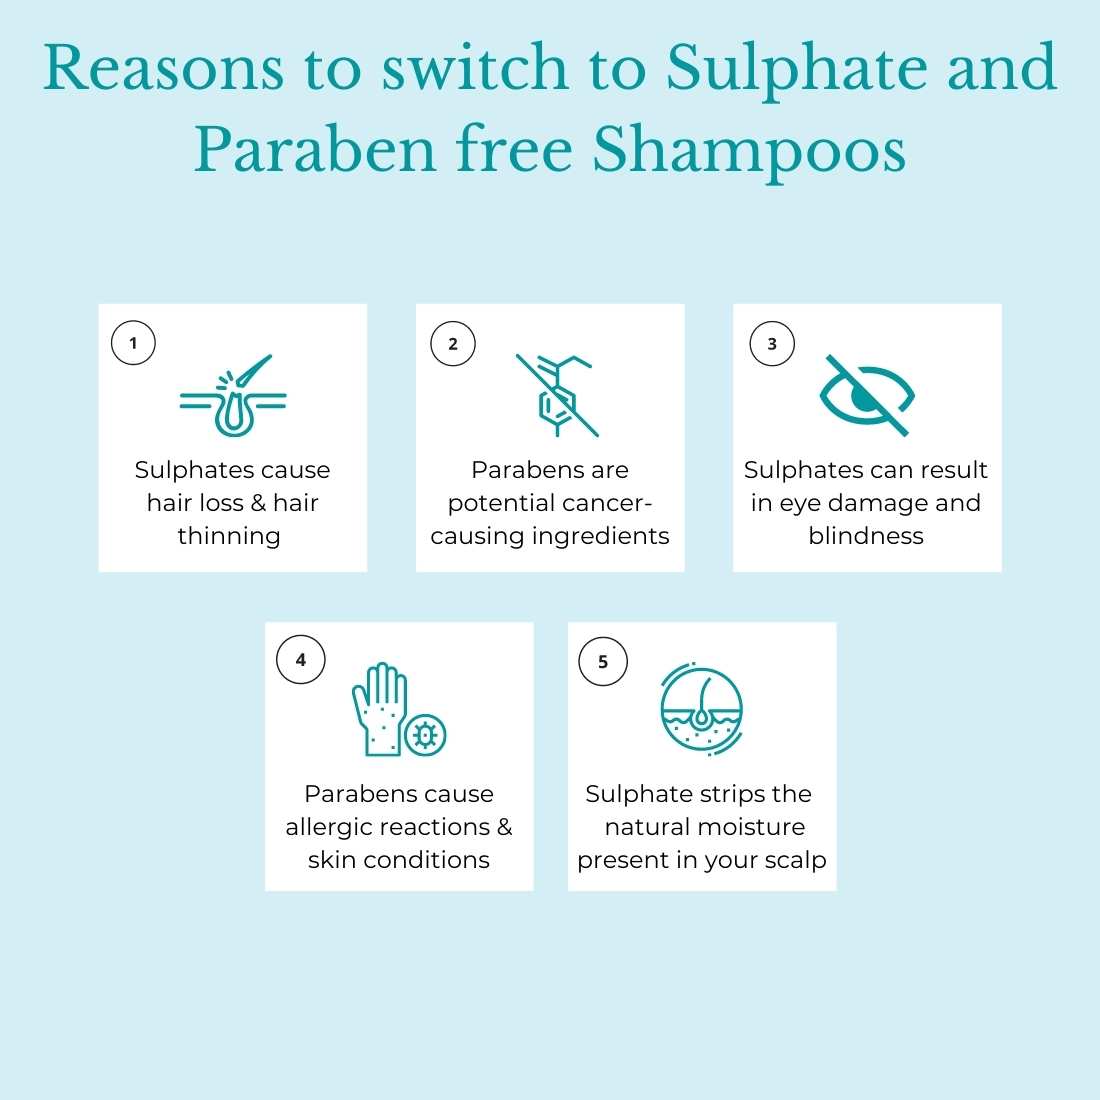 This is an image showing the reasons to switch to paraben and sulphate free shampoo.